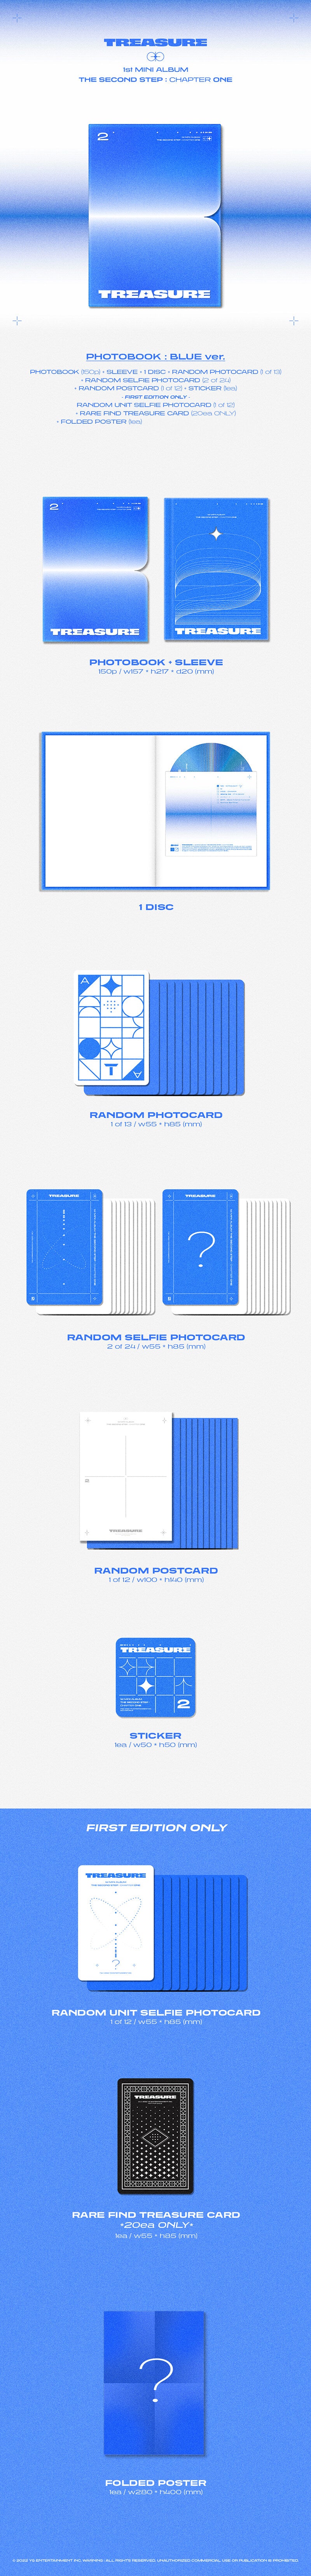 TREASURE 1ST MINI ALBUM 'THE SECOND STEP : CHAPTER ONE' (PHOTO BOOK) blue version detail